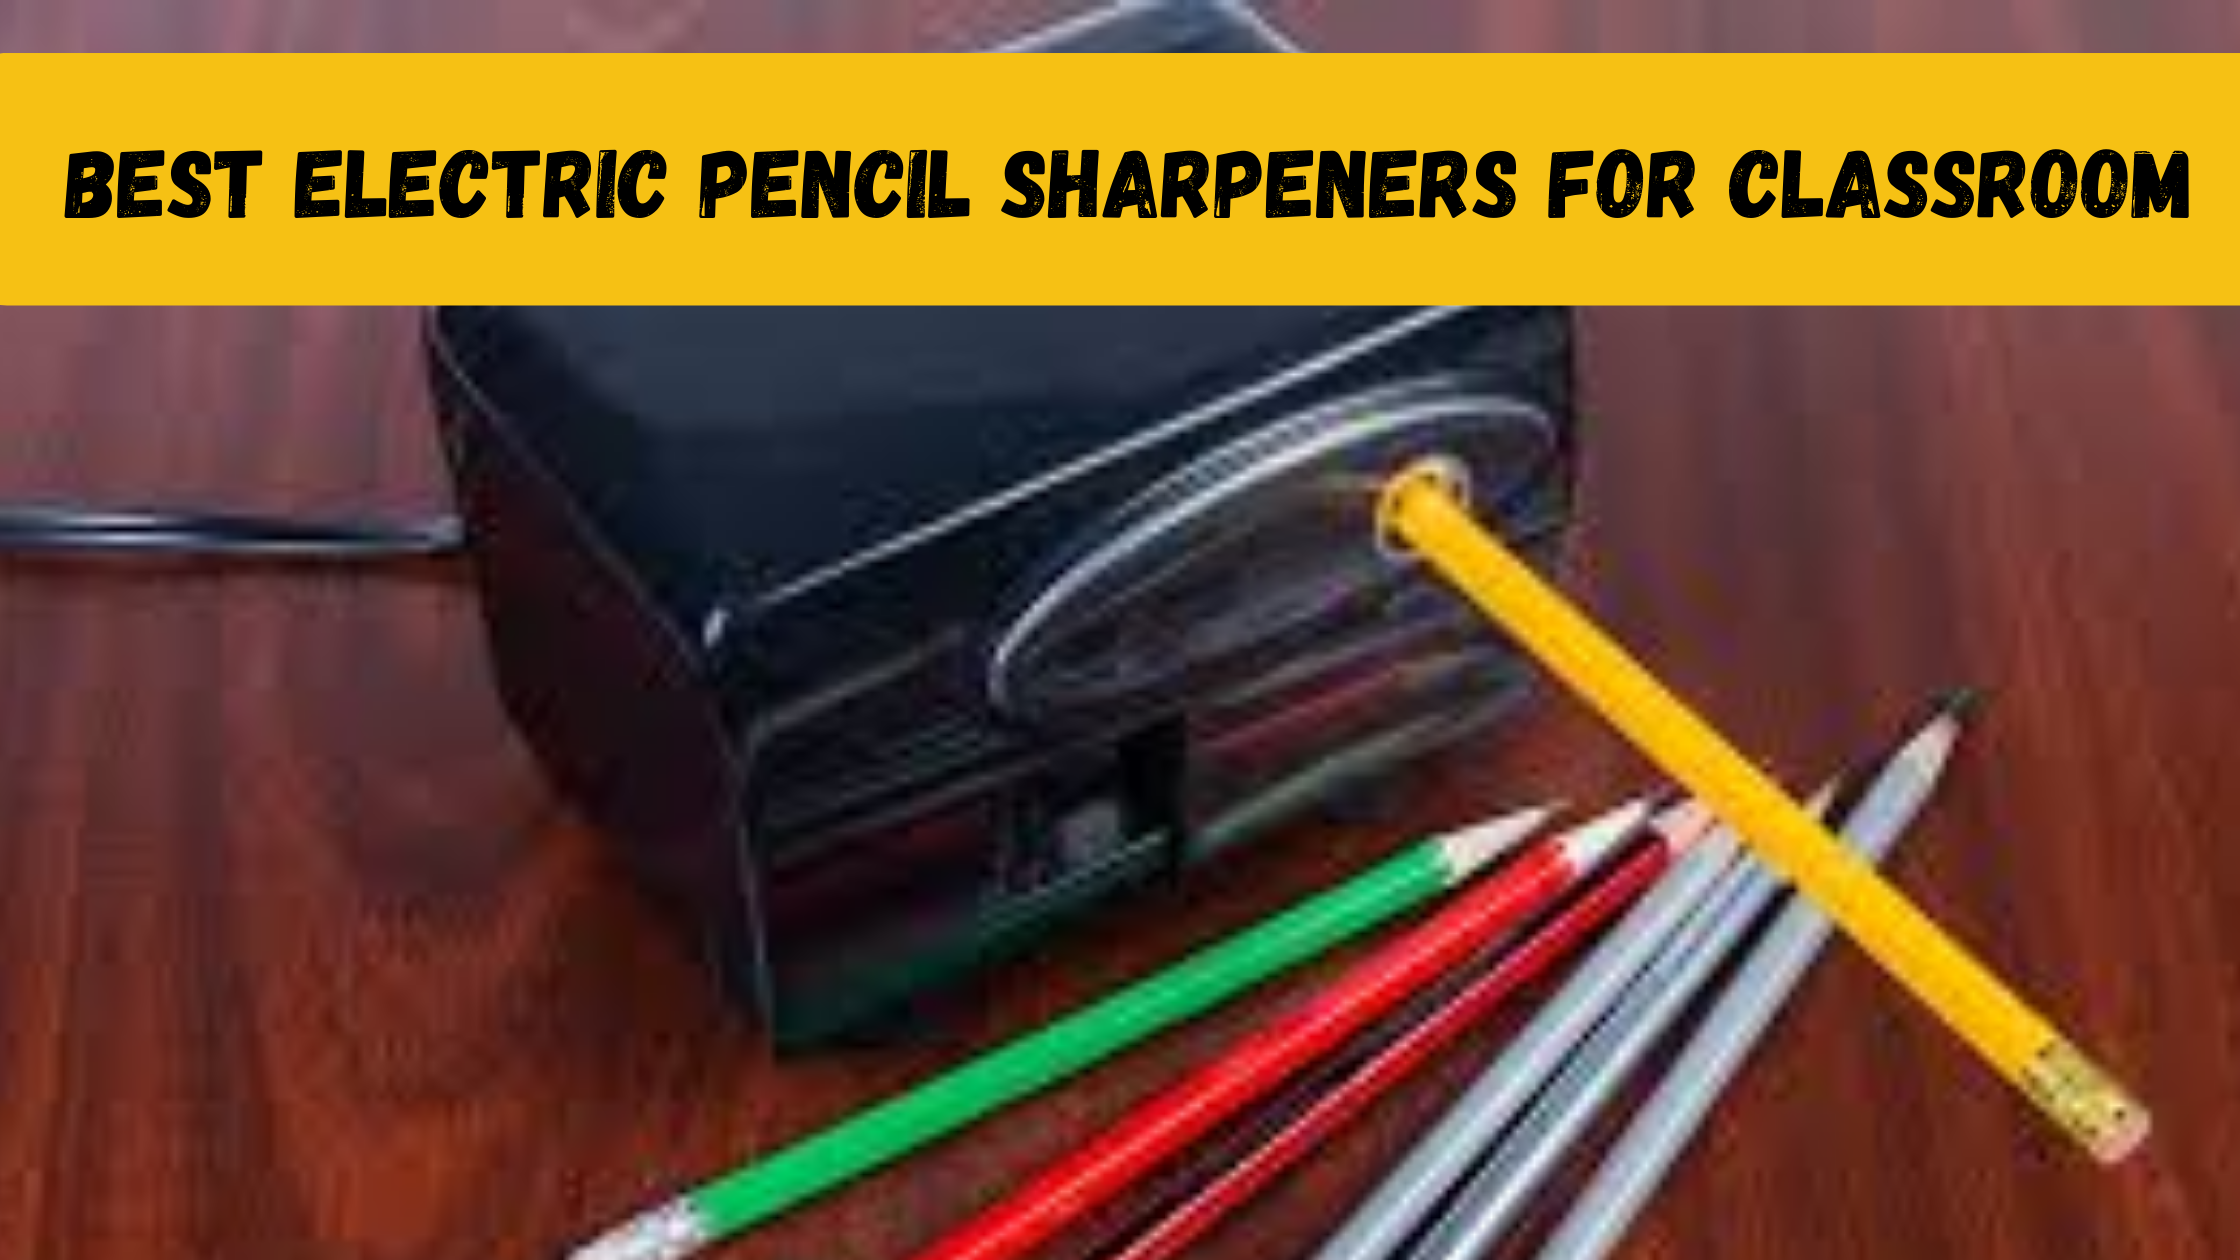 Best Electric Pencil Sharpeners for Classroom 